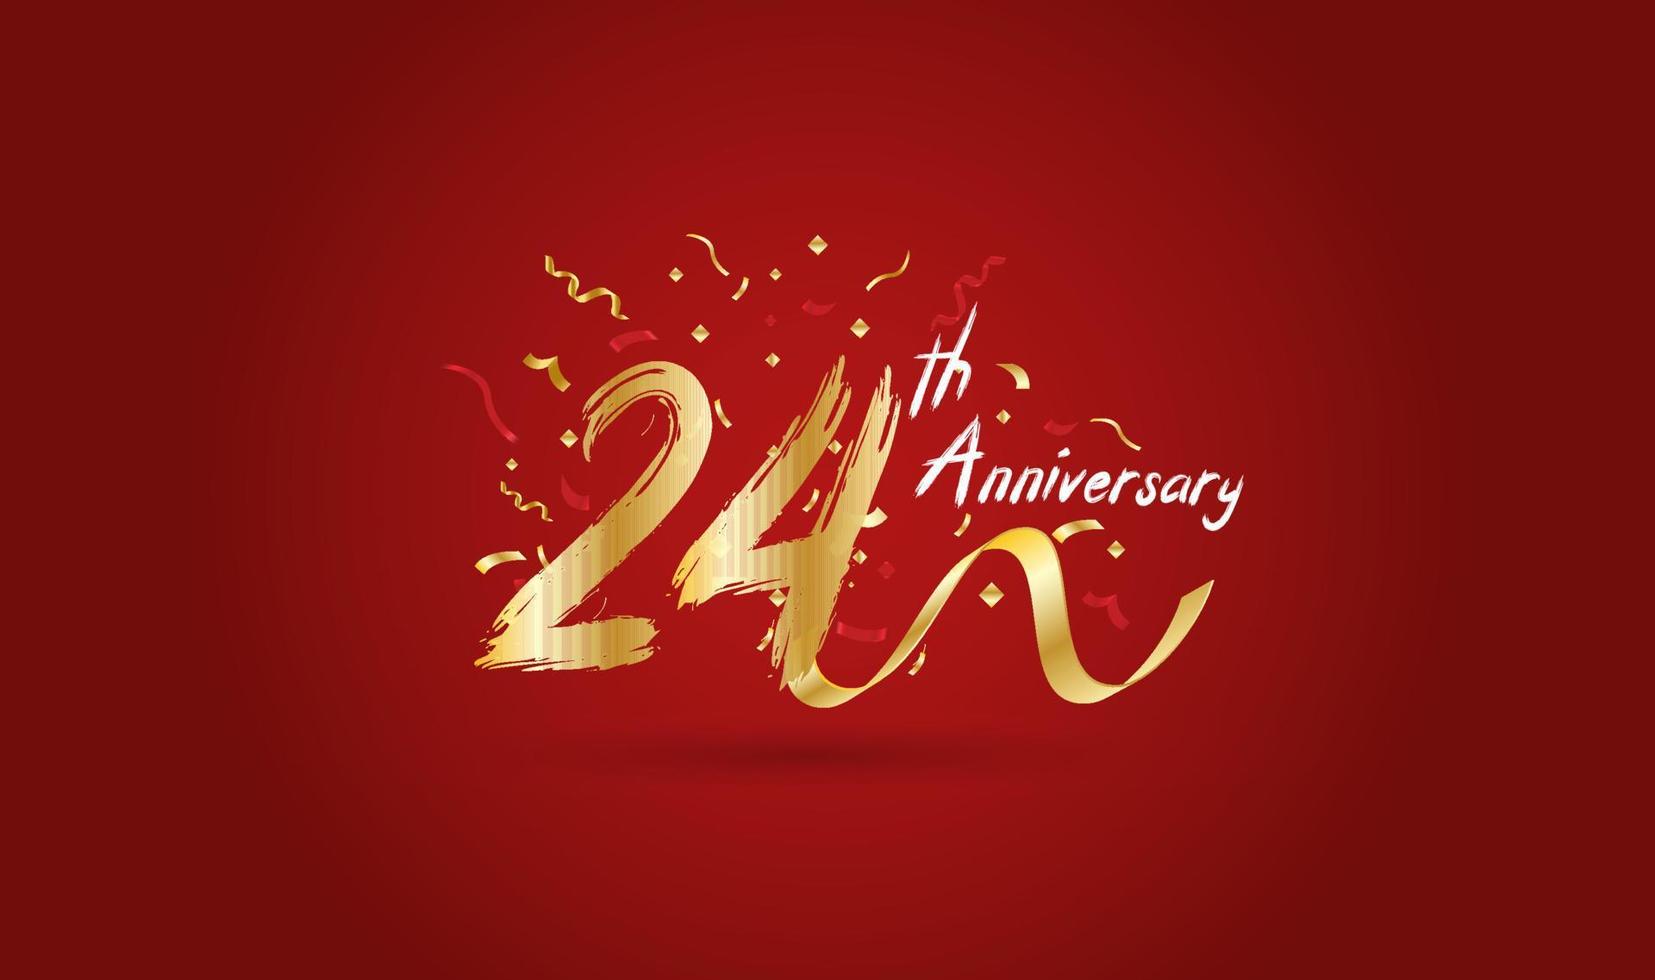 Anniversary celebration background. with the 24th number in gold and with the words golden anniversary celebration. vector